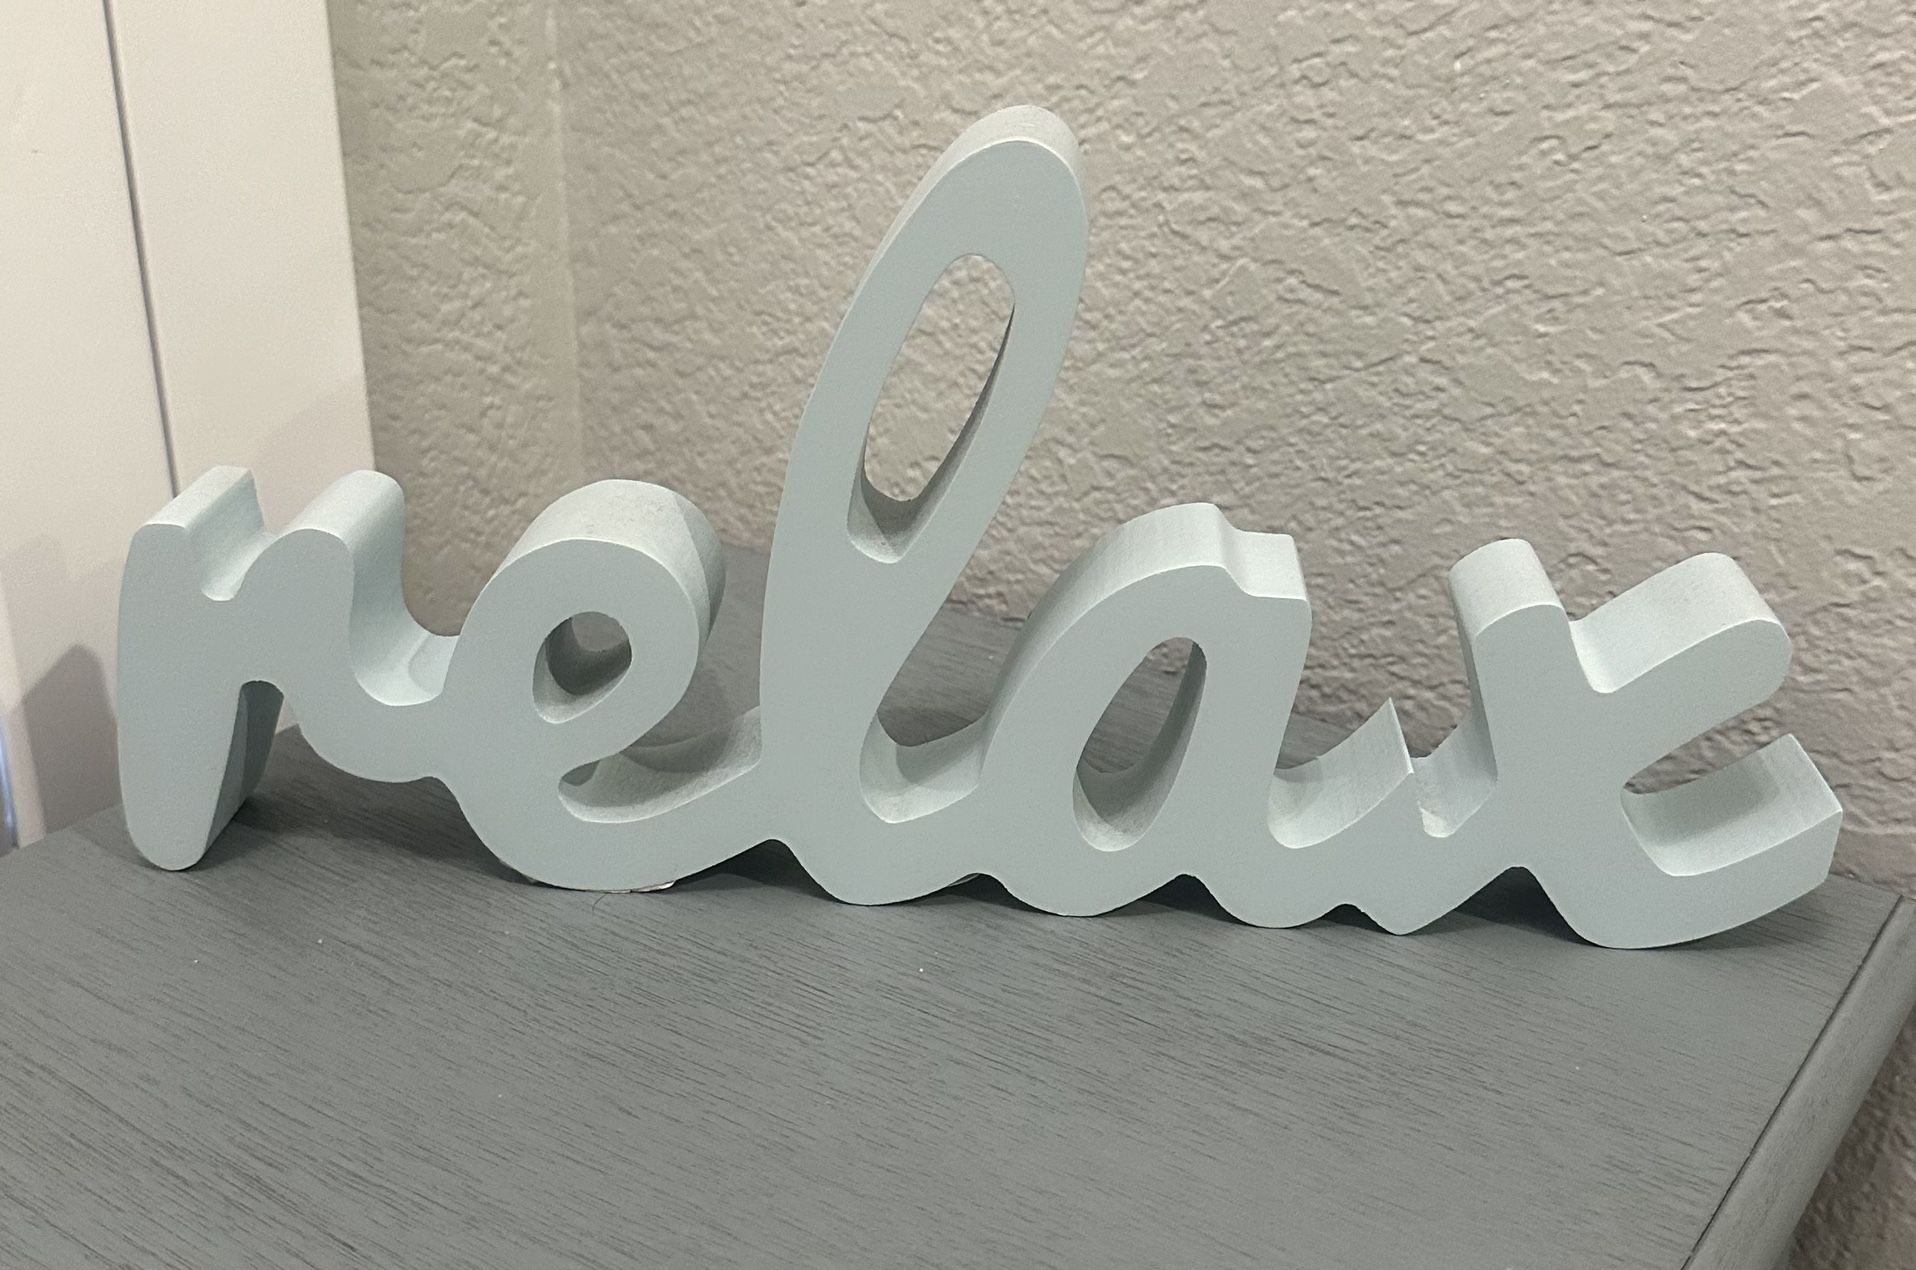 $10…New  Beach themed wooden decor “relax”, measures 14” long, 6.5” tall & 1.5” width. Please pickup in the area of 36th Ave and Pinnacle peak within 